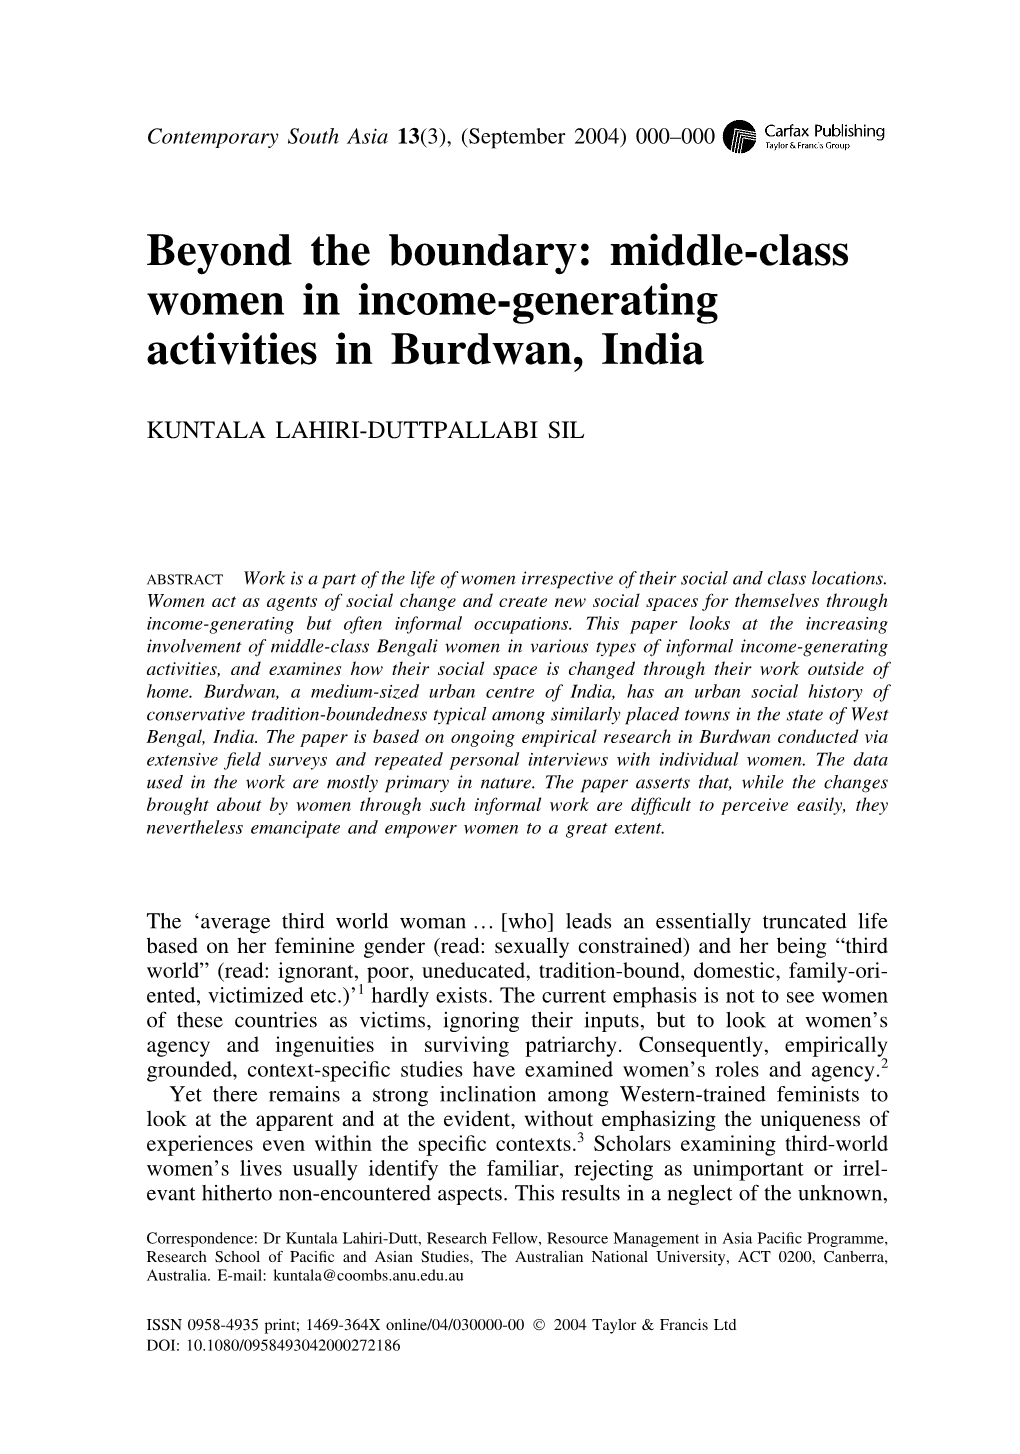 Beyond the Boundary: Middle-Class Women in Income-Generating Activities in Burdwan, India